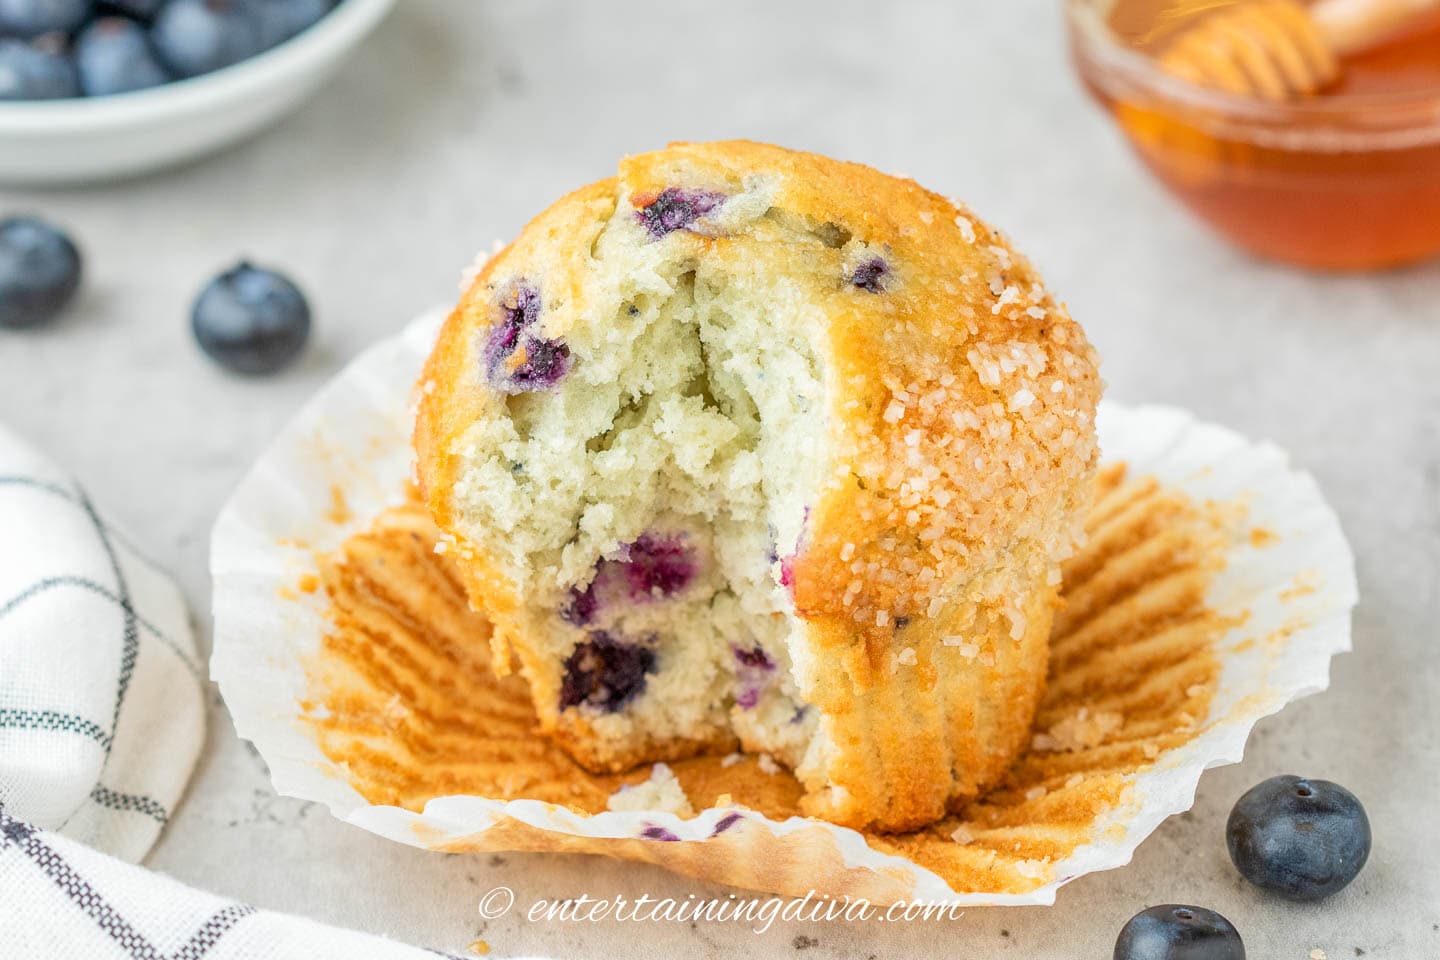 Homemade blueberry muffin with a bite out of it